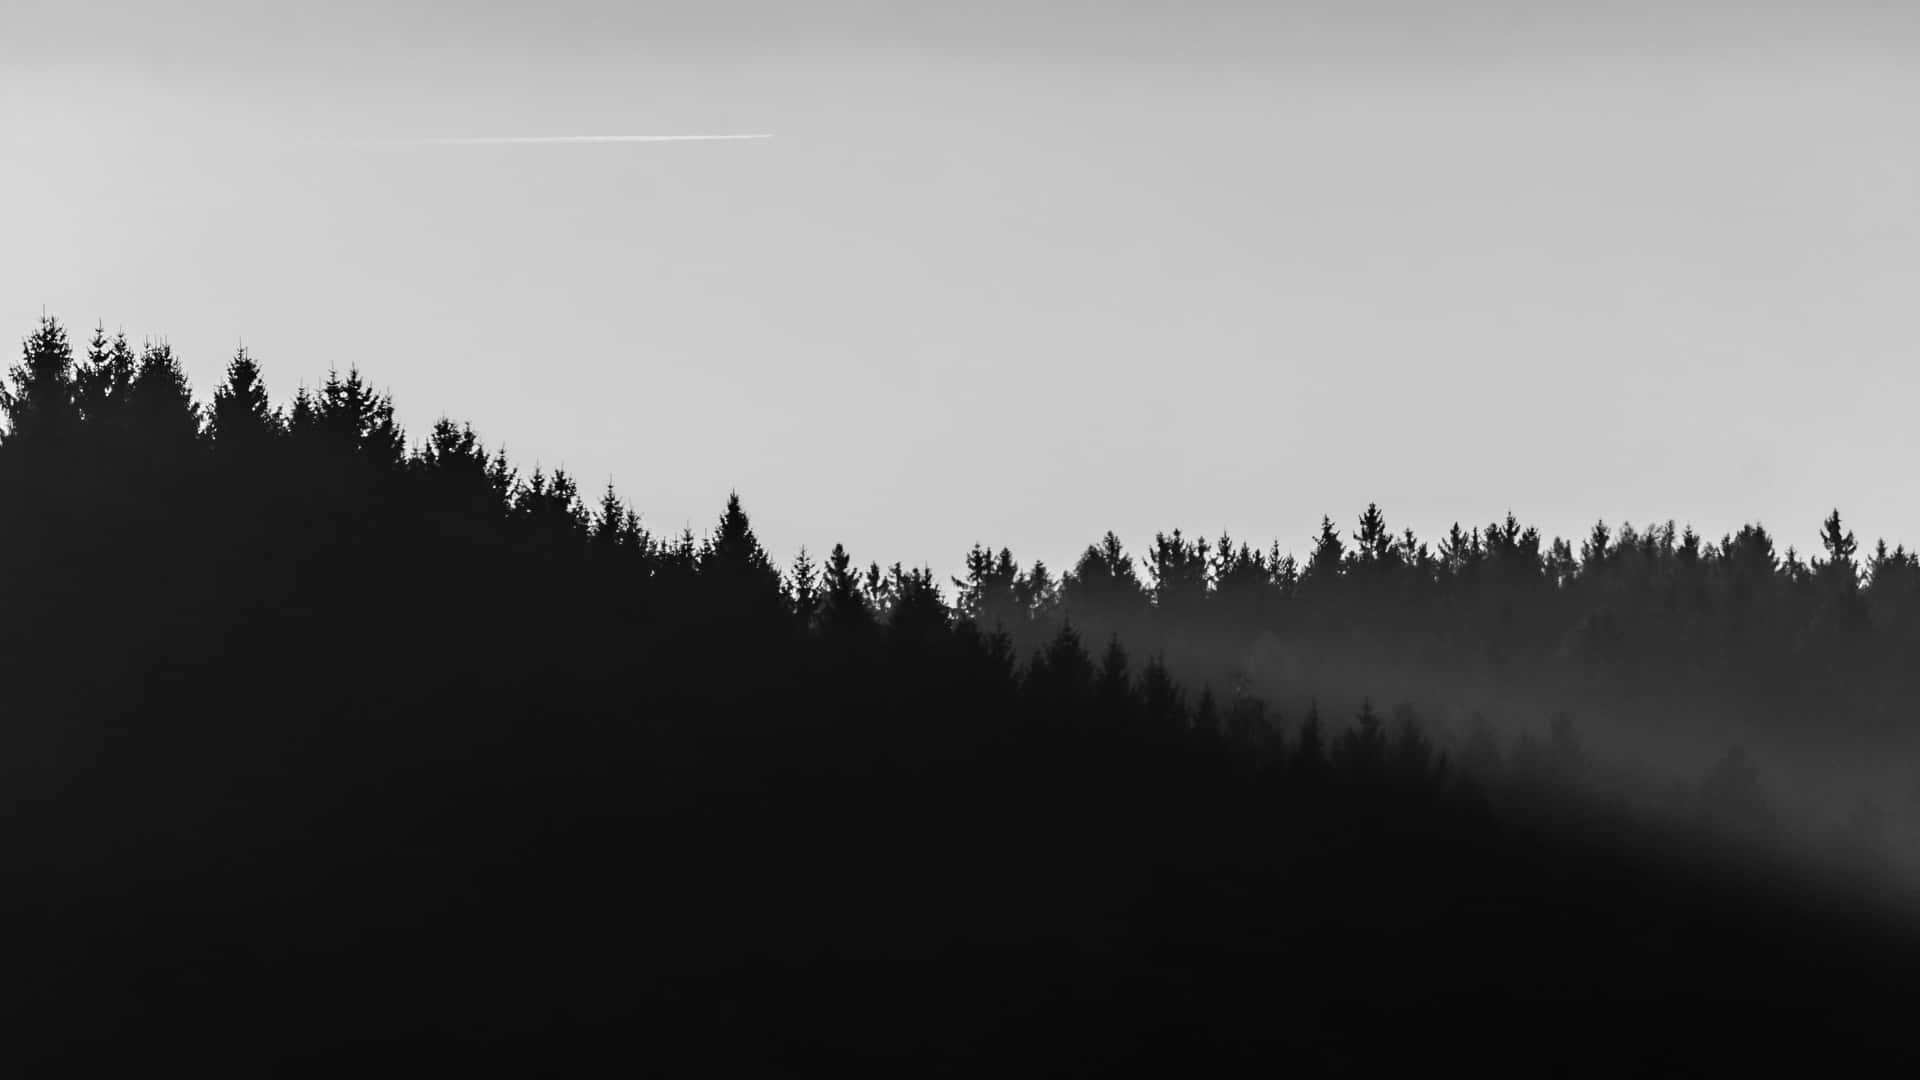 A Black And White Photo Of A Mountain With Trees Wallpaper